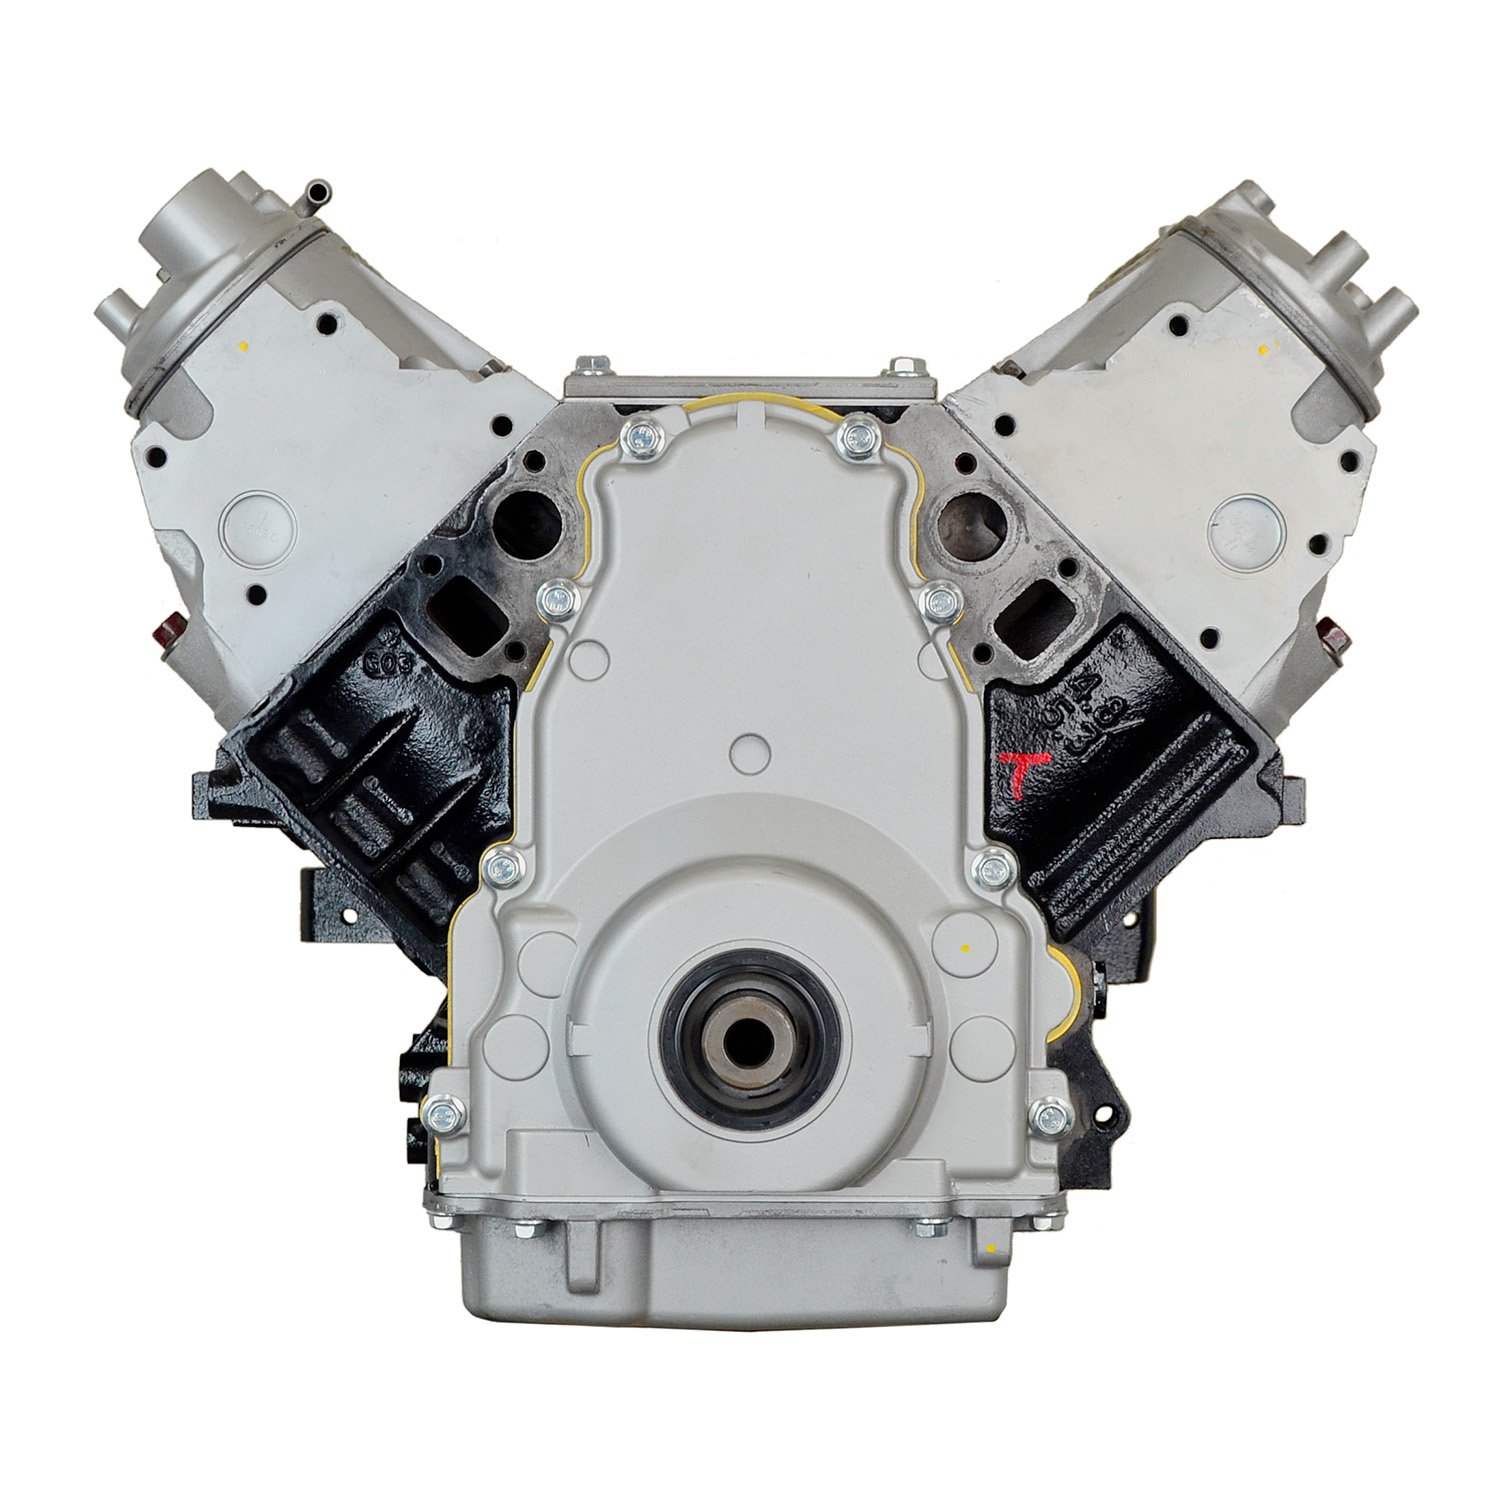 VCT82WD Remanufactured Crate Engine for 1999-2007 Chevy/GMC Truck, SUV, & Van with 5.3L V8